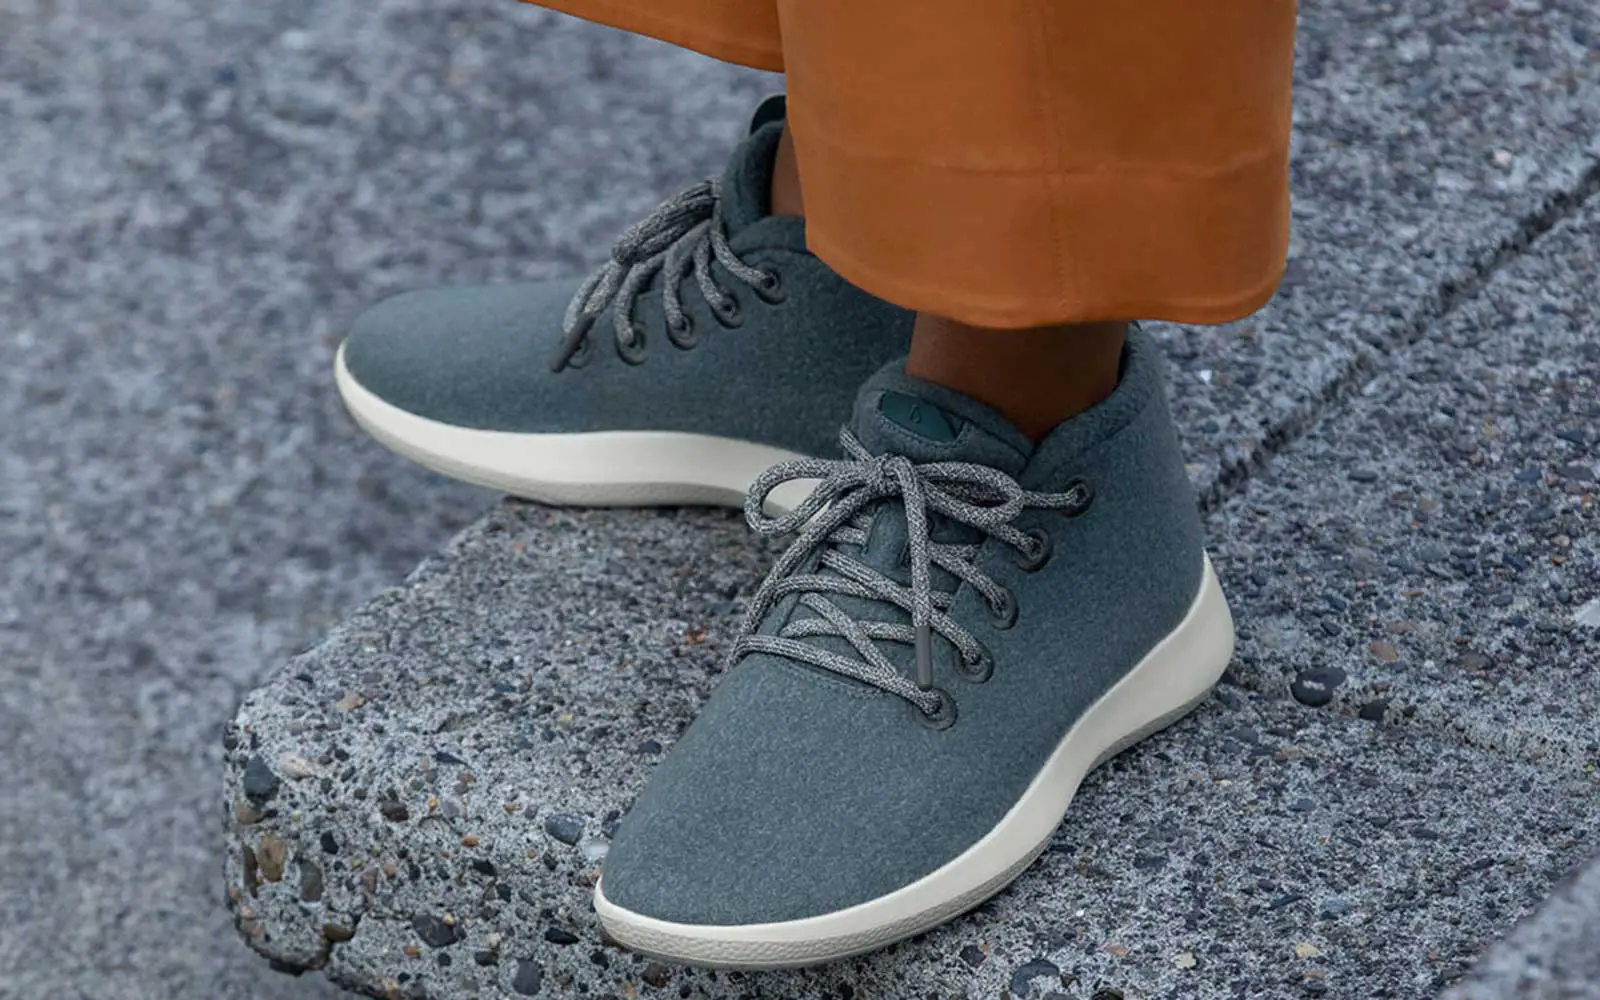 Allbirds Winter Collection: The Cozy Shoes You